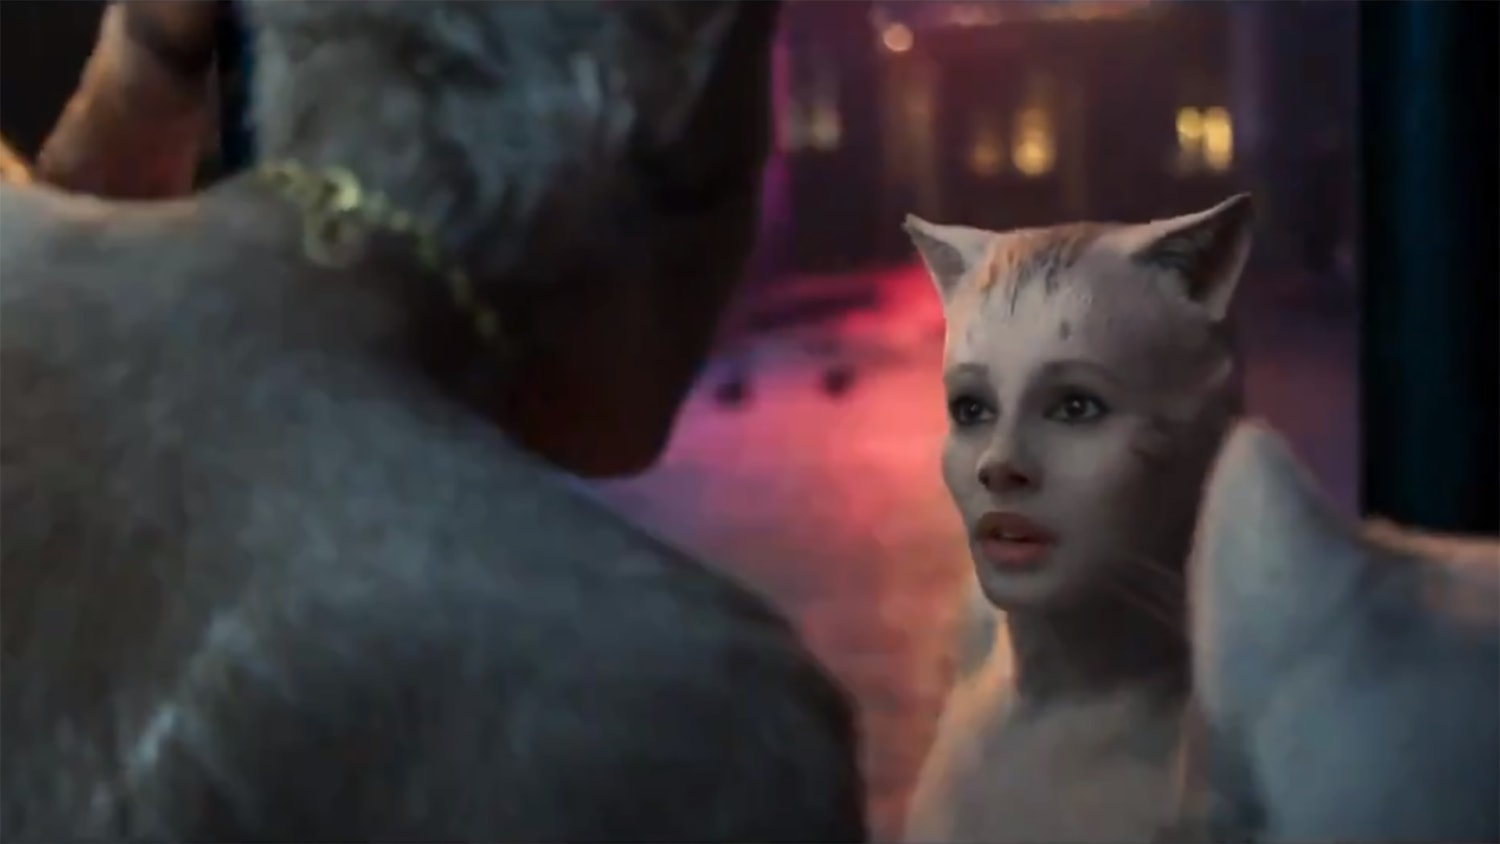 Cats' movie trailer unnerves many on Internet: 'I shrieked out loud